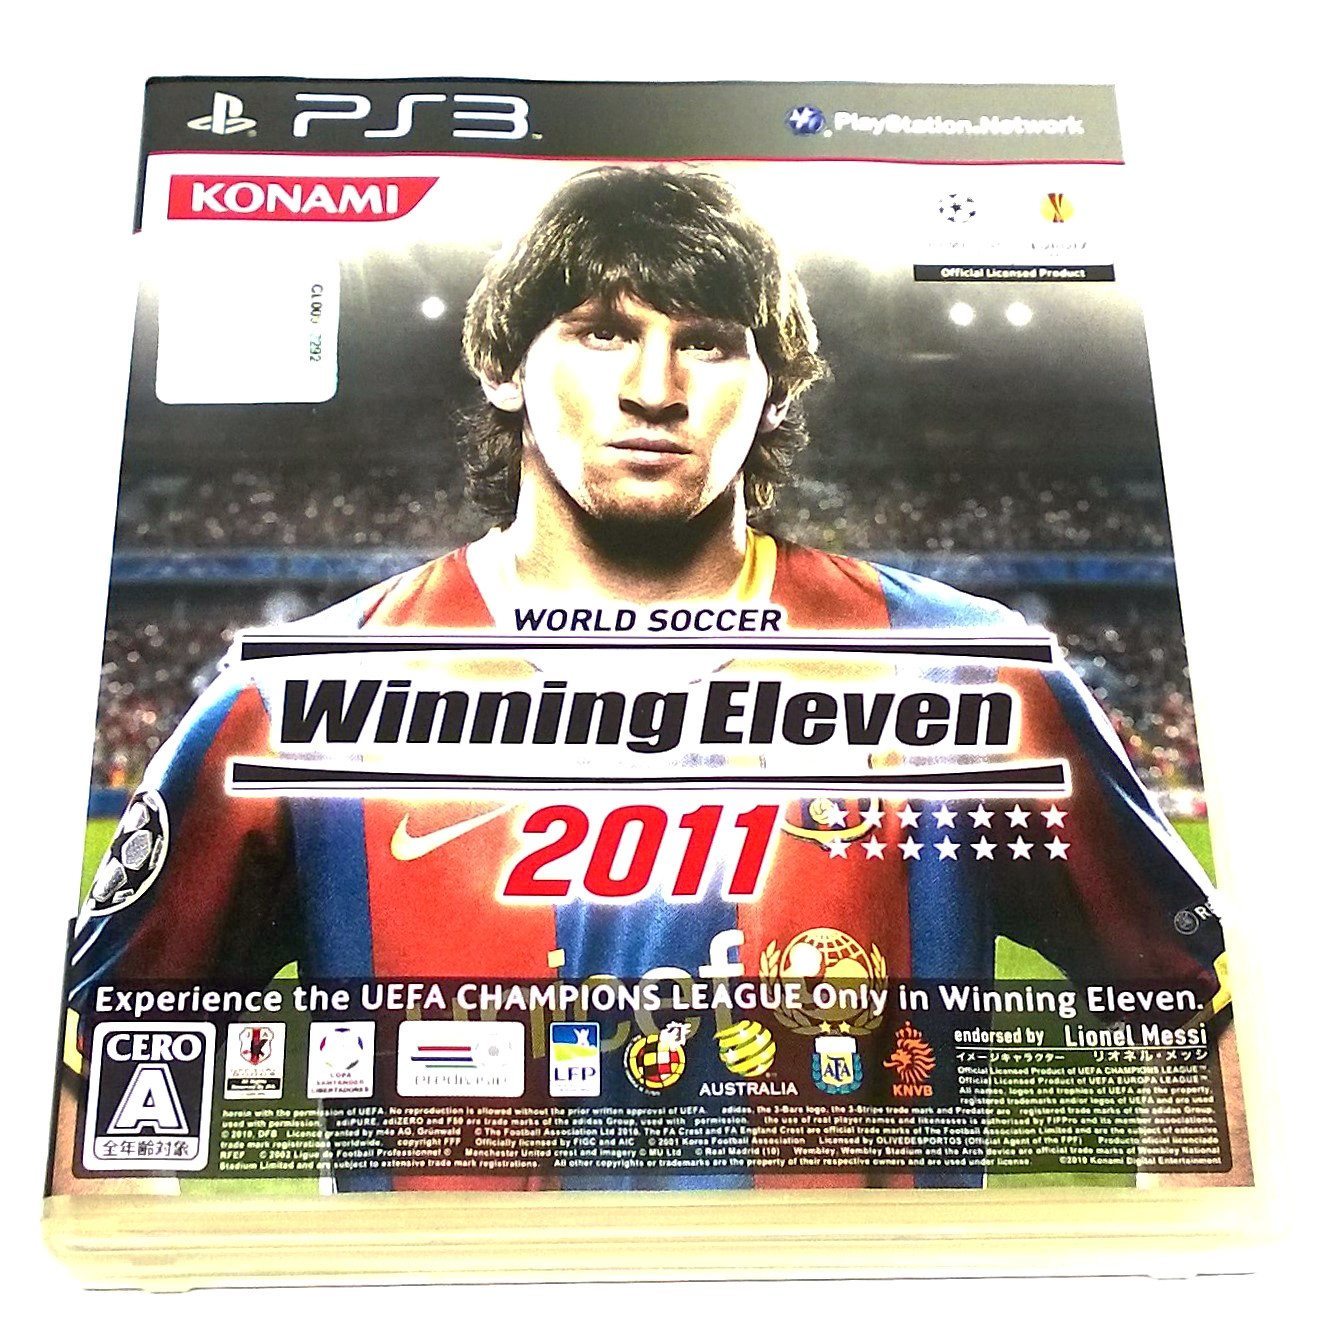 World Soccer Winning Eleven 2011 for PlayStation 3 (import) - Front of case